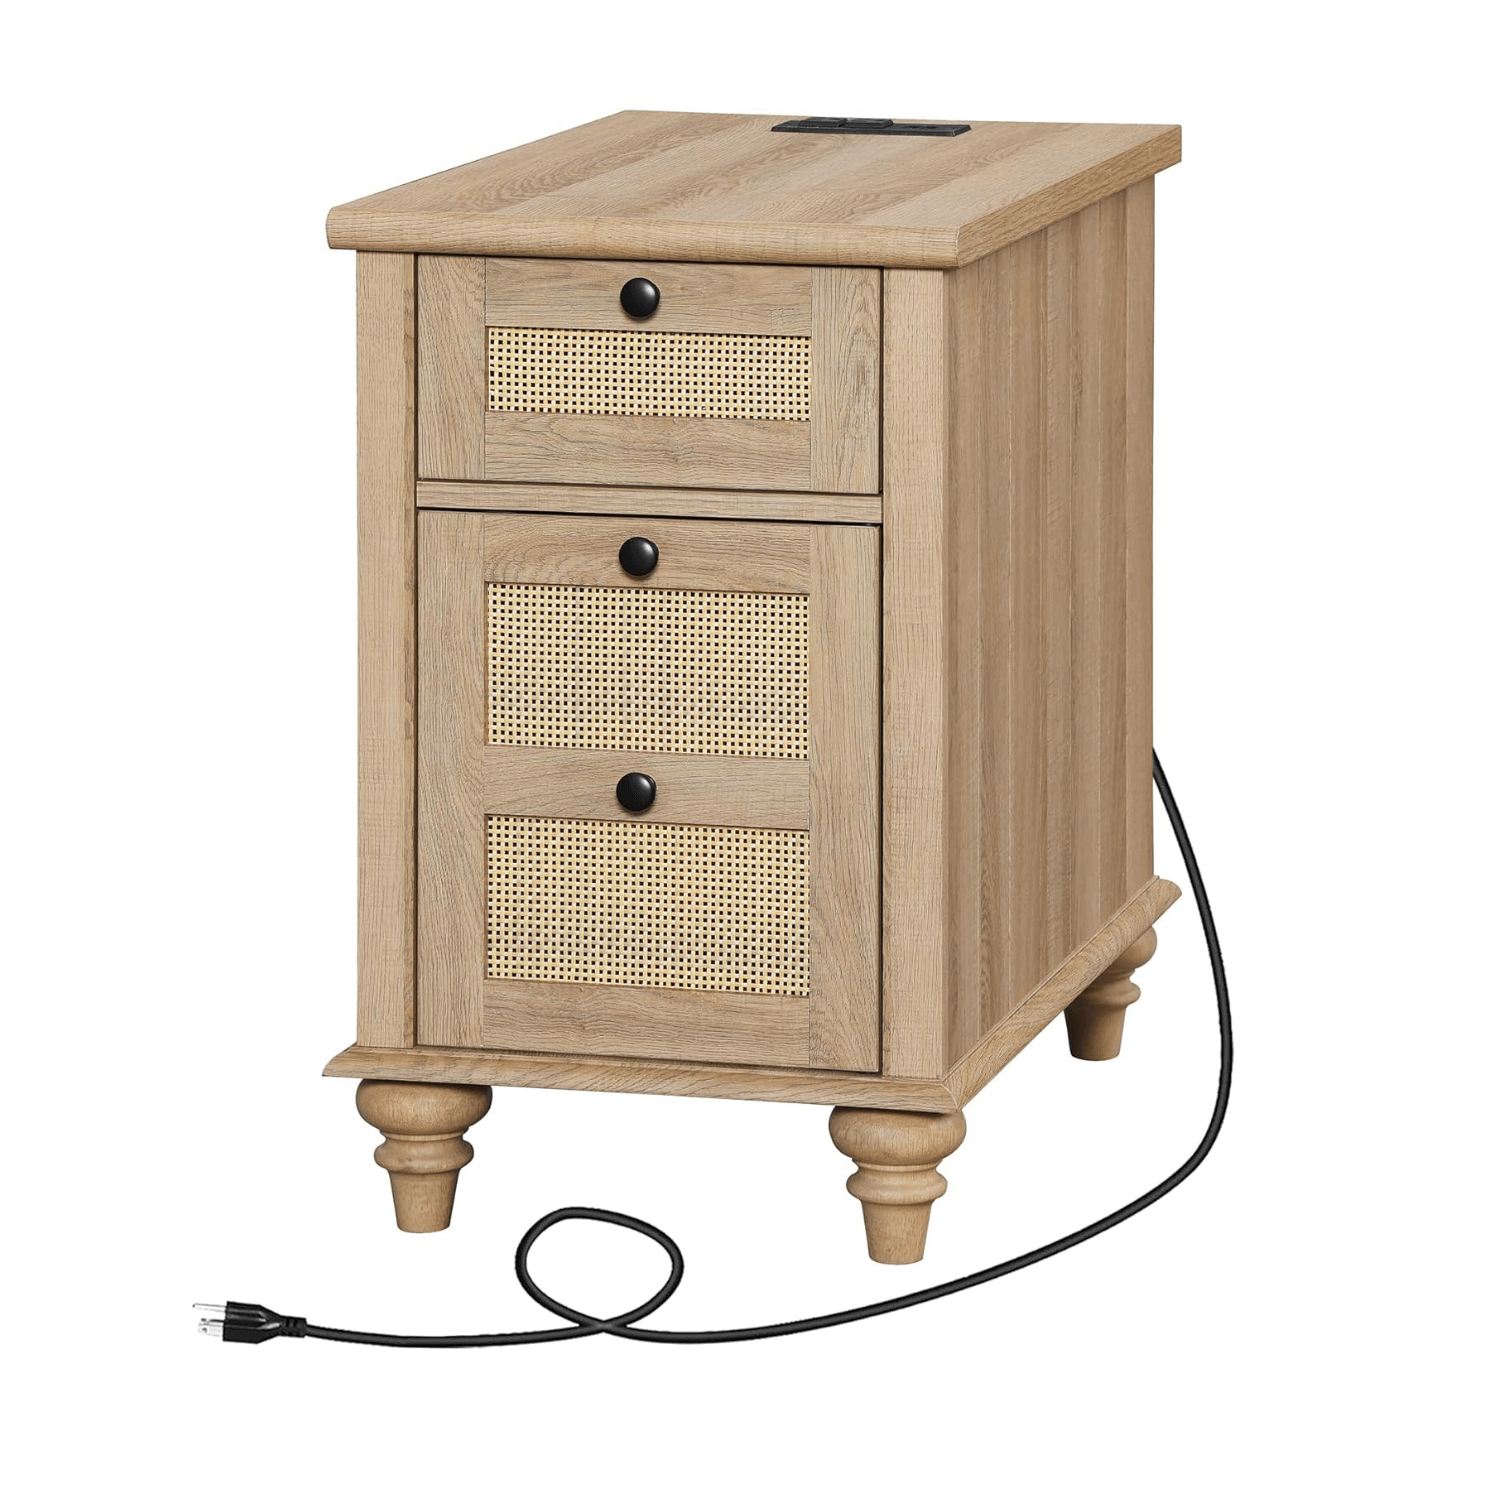 WAMPAT End Table with Charging Station, Wood Side Sofa Table Rattan Weaving Nightstand for Living Room Bedroom, Oak